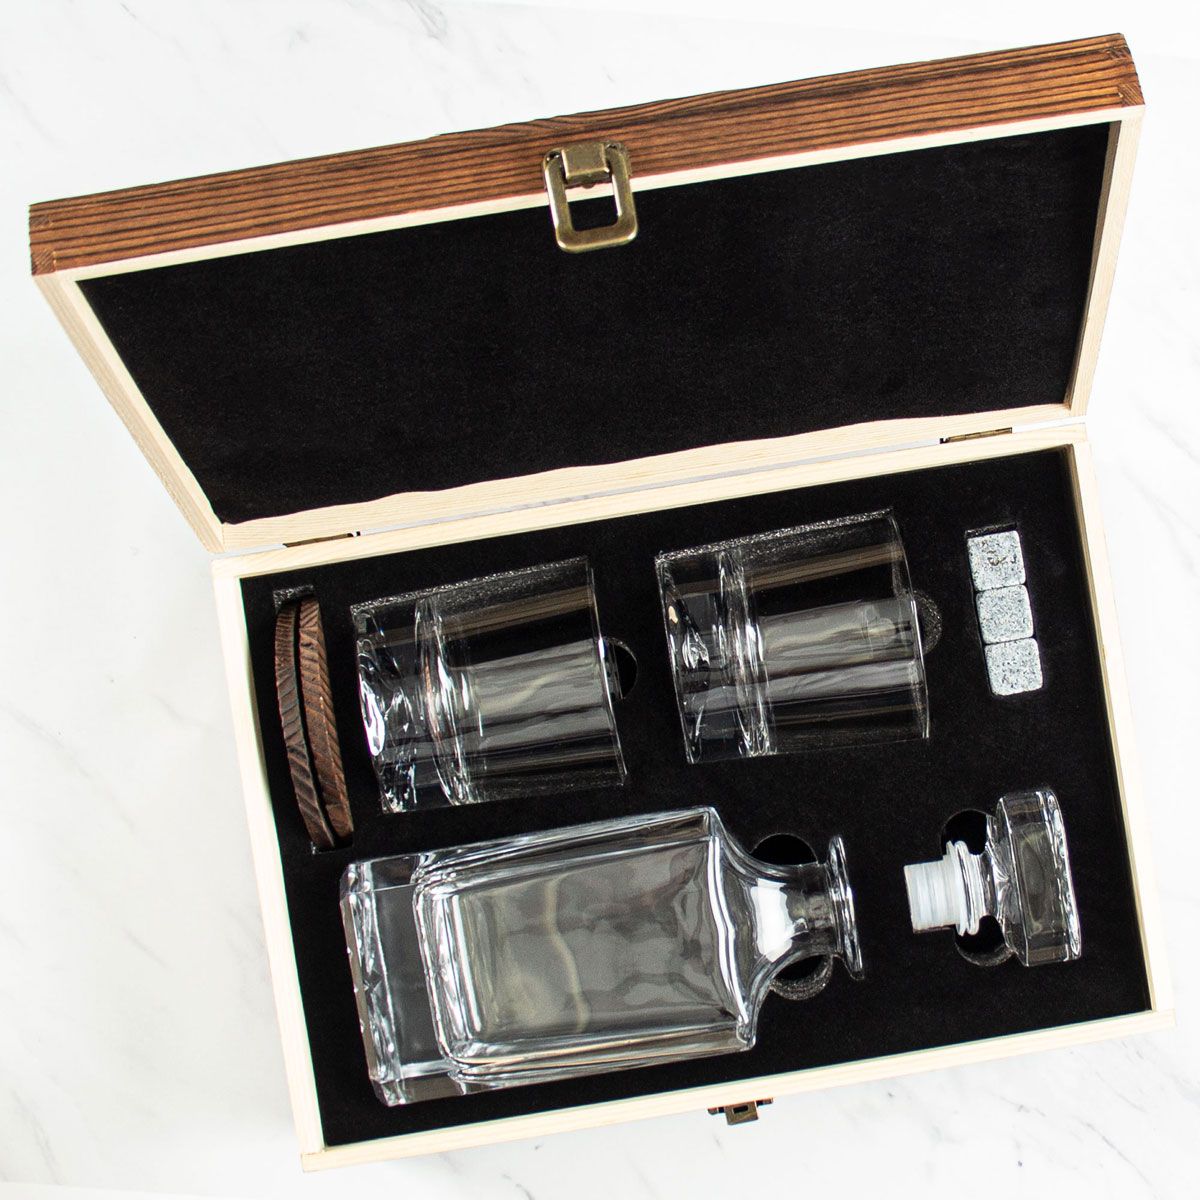 https://eadn-wc05-3553049.nxedge.io/cdn/pub/media/catalog/product/cache/cadfcab9541cceed074b162a88ae1457/3/-/3-personalized_whiskey_decanter_set_in_wood_gift_box_-_top_view_1_1_1_1_1_1_1_1.jpg